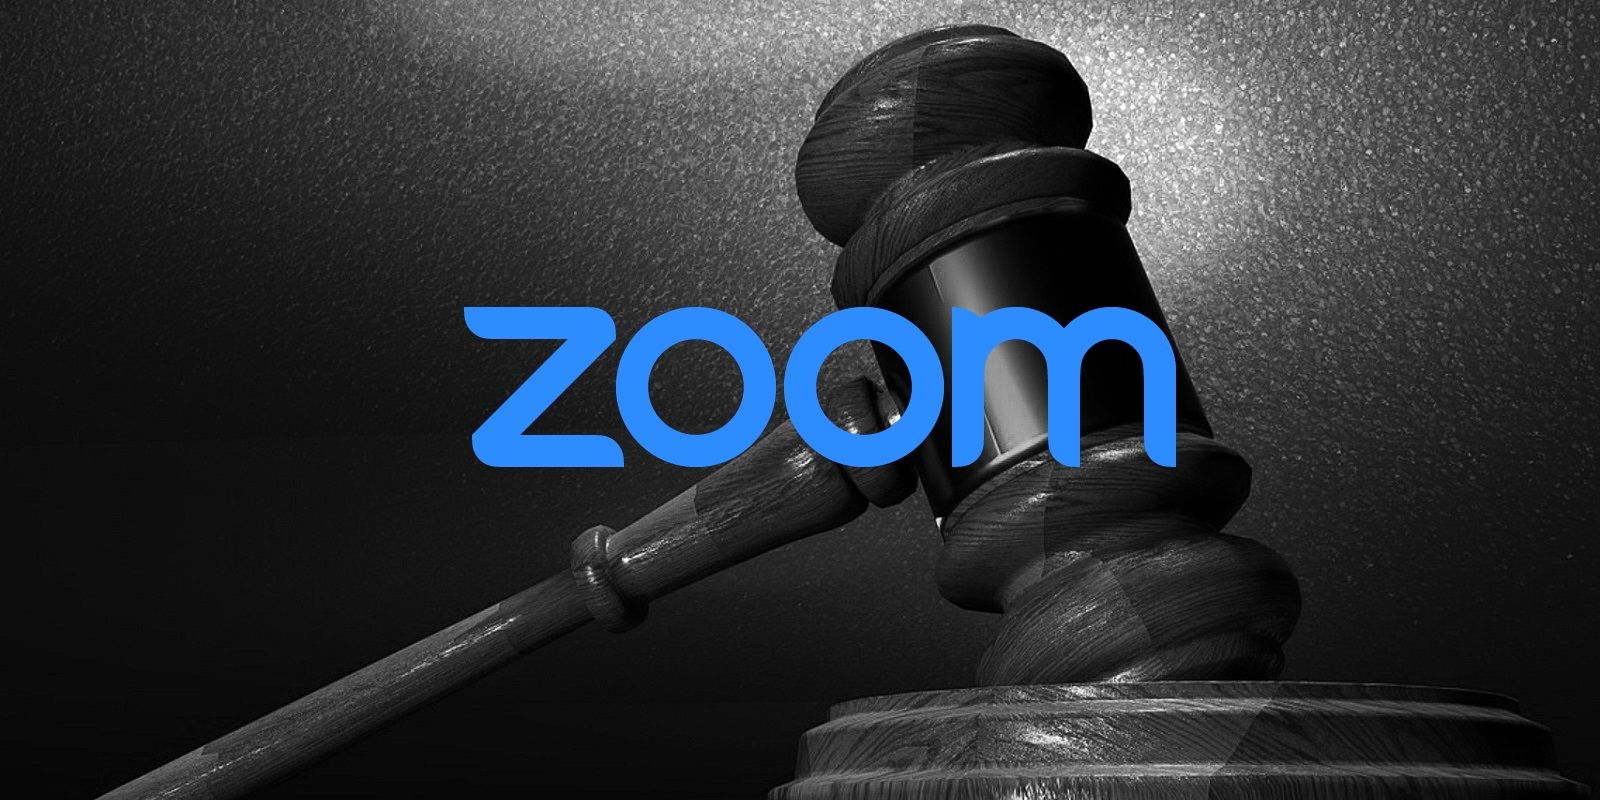 zoom class action lawsuit email scam